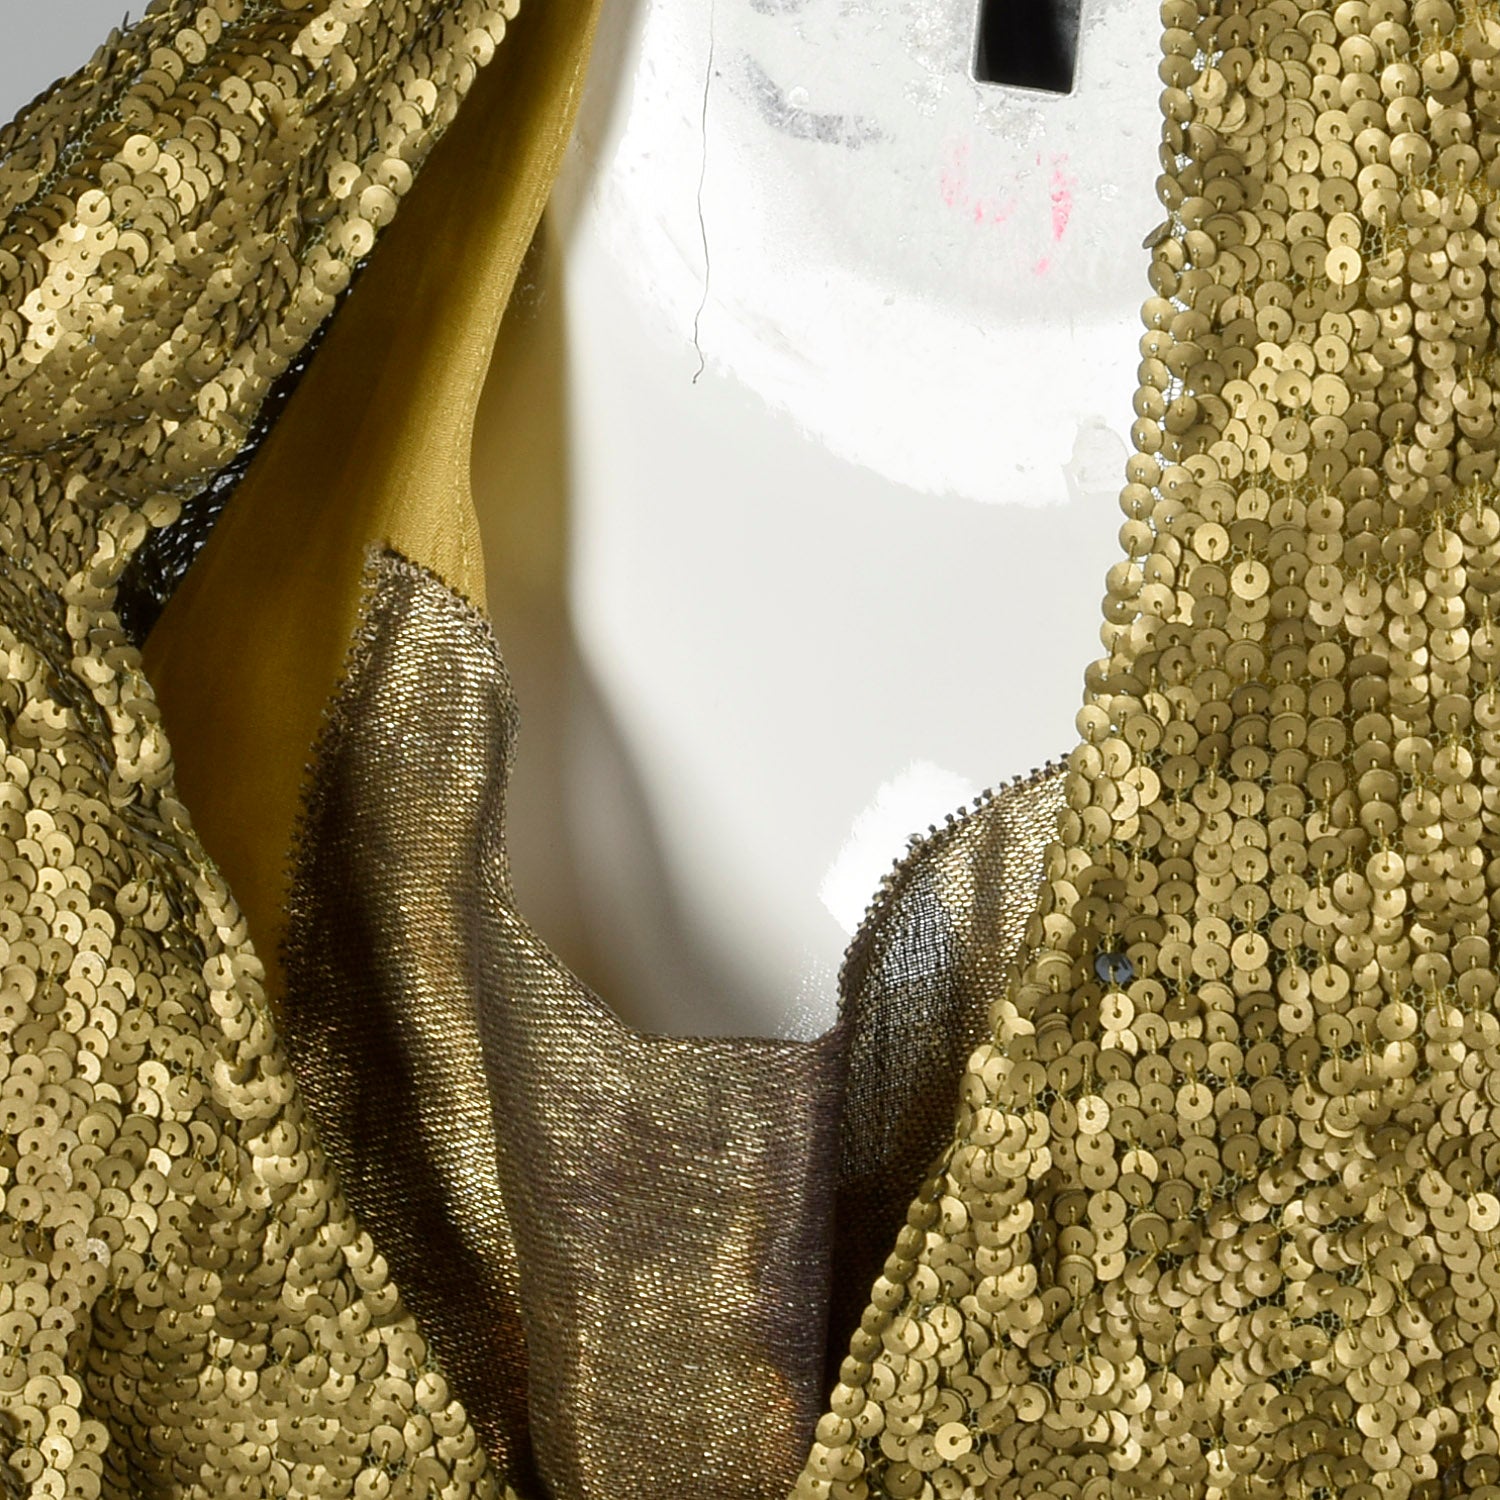 1920s Sequined Dress with Gold Lamé & Silk Details